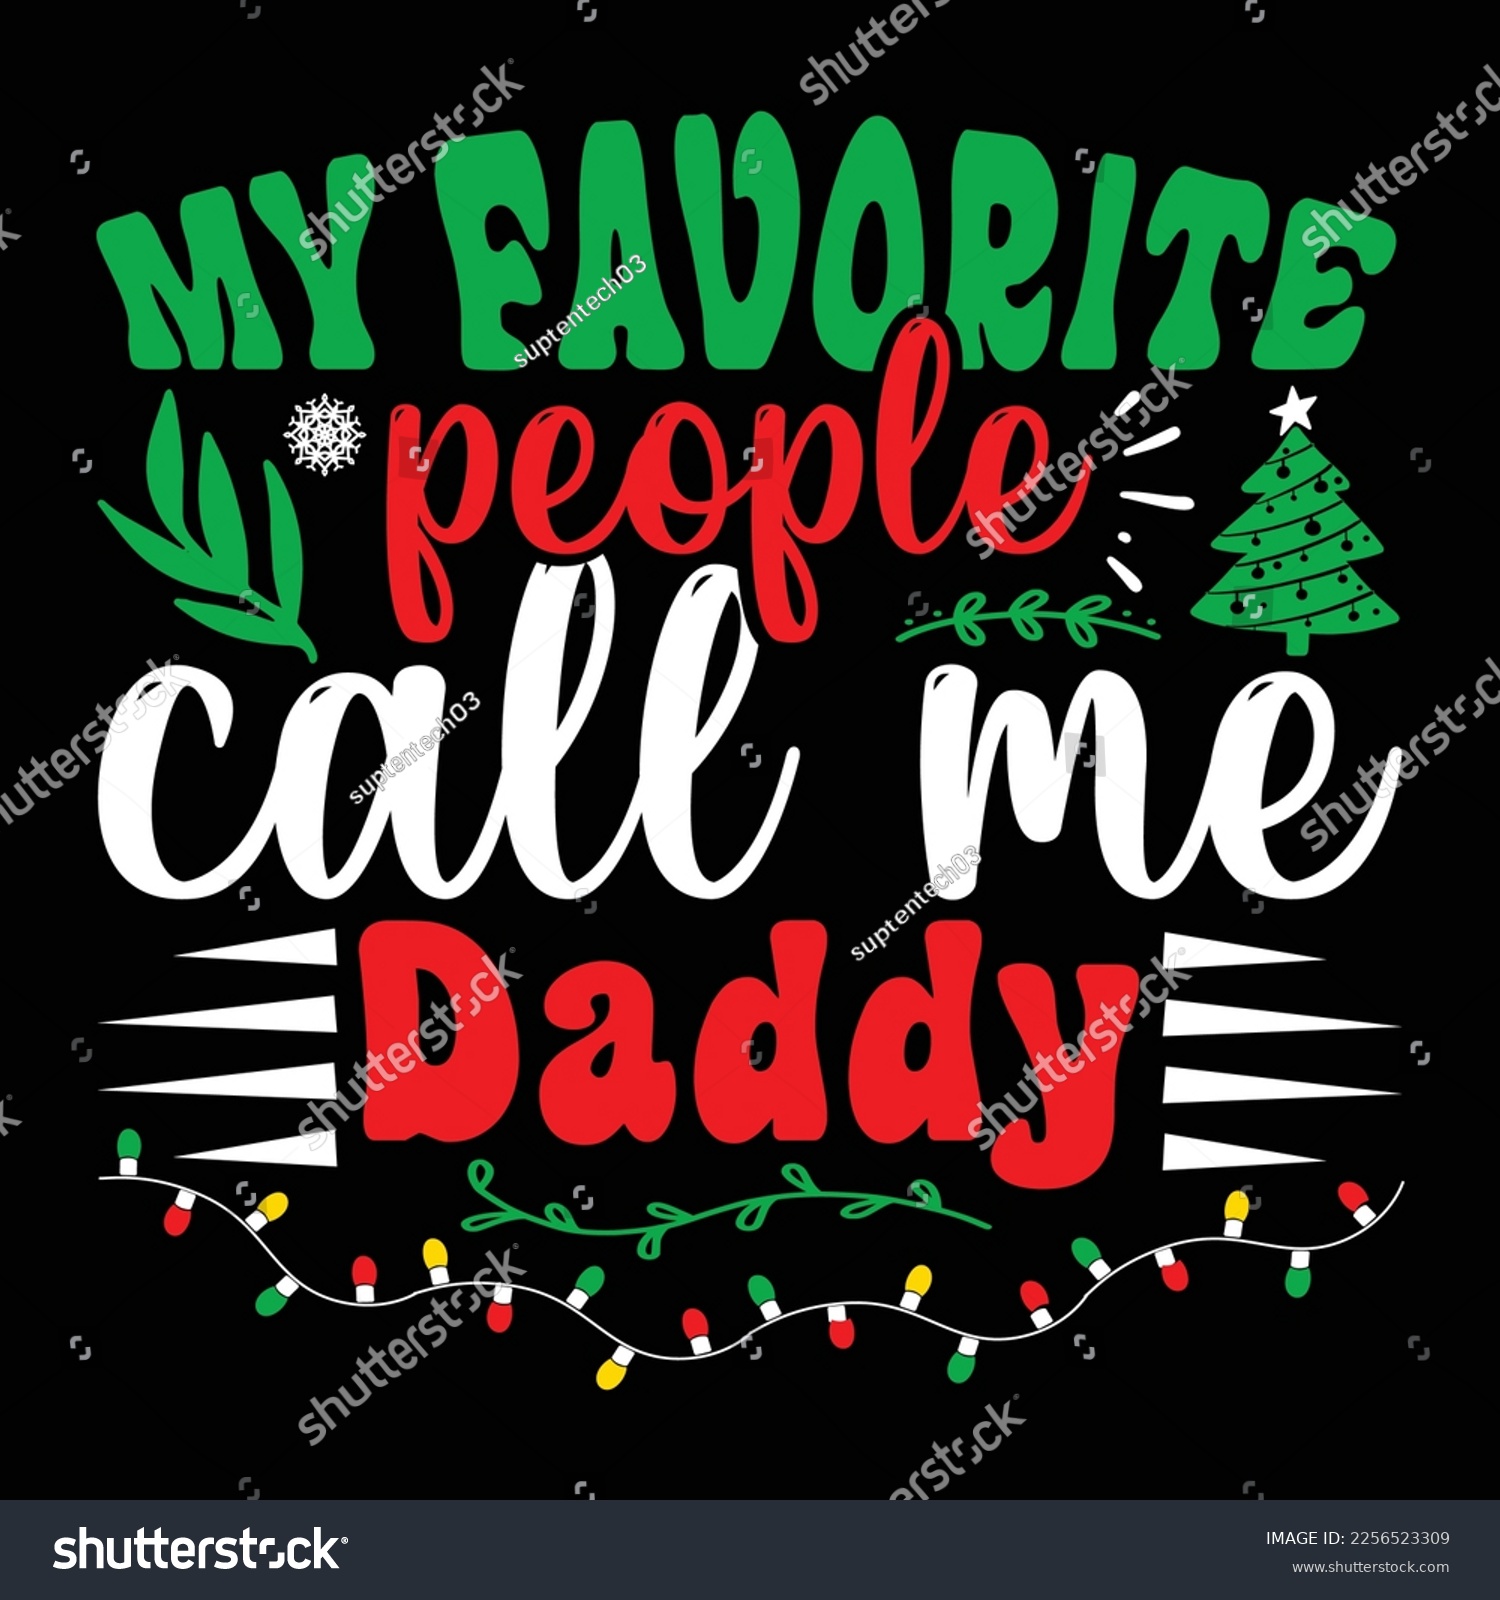 SVG of My Favorite People Call Me Daddy, Merry Christmas shirts Print Template, Xmas Ugly Snow Santa Clouse New Year Holiday Candy Santa Hat vector illustration for Christmas hand lettered  svg